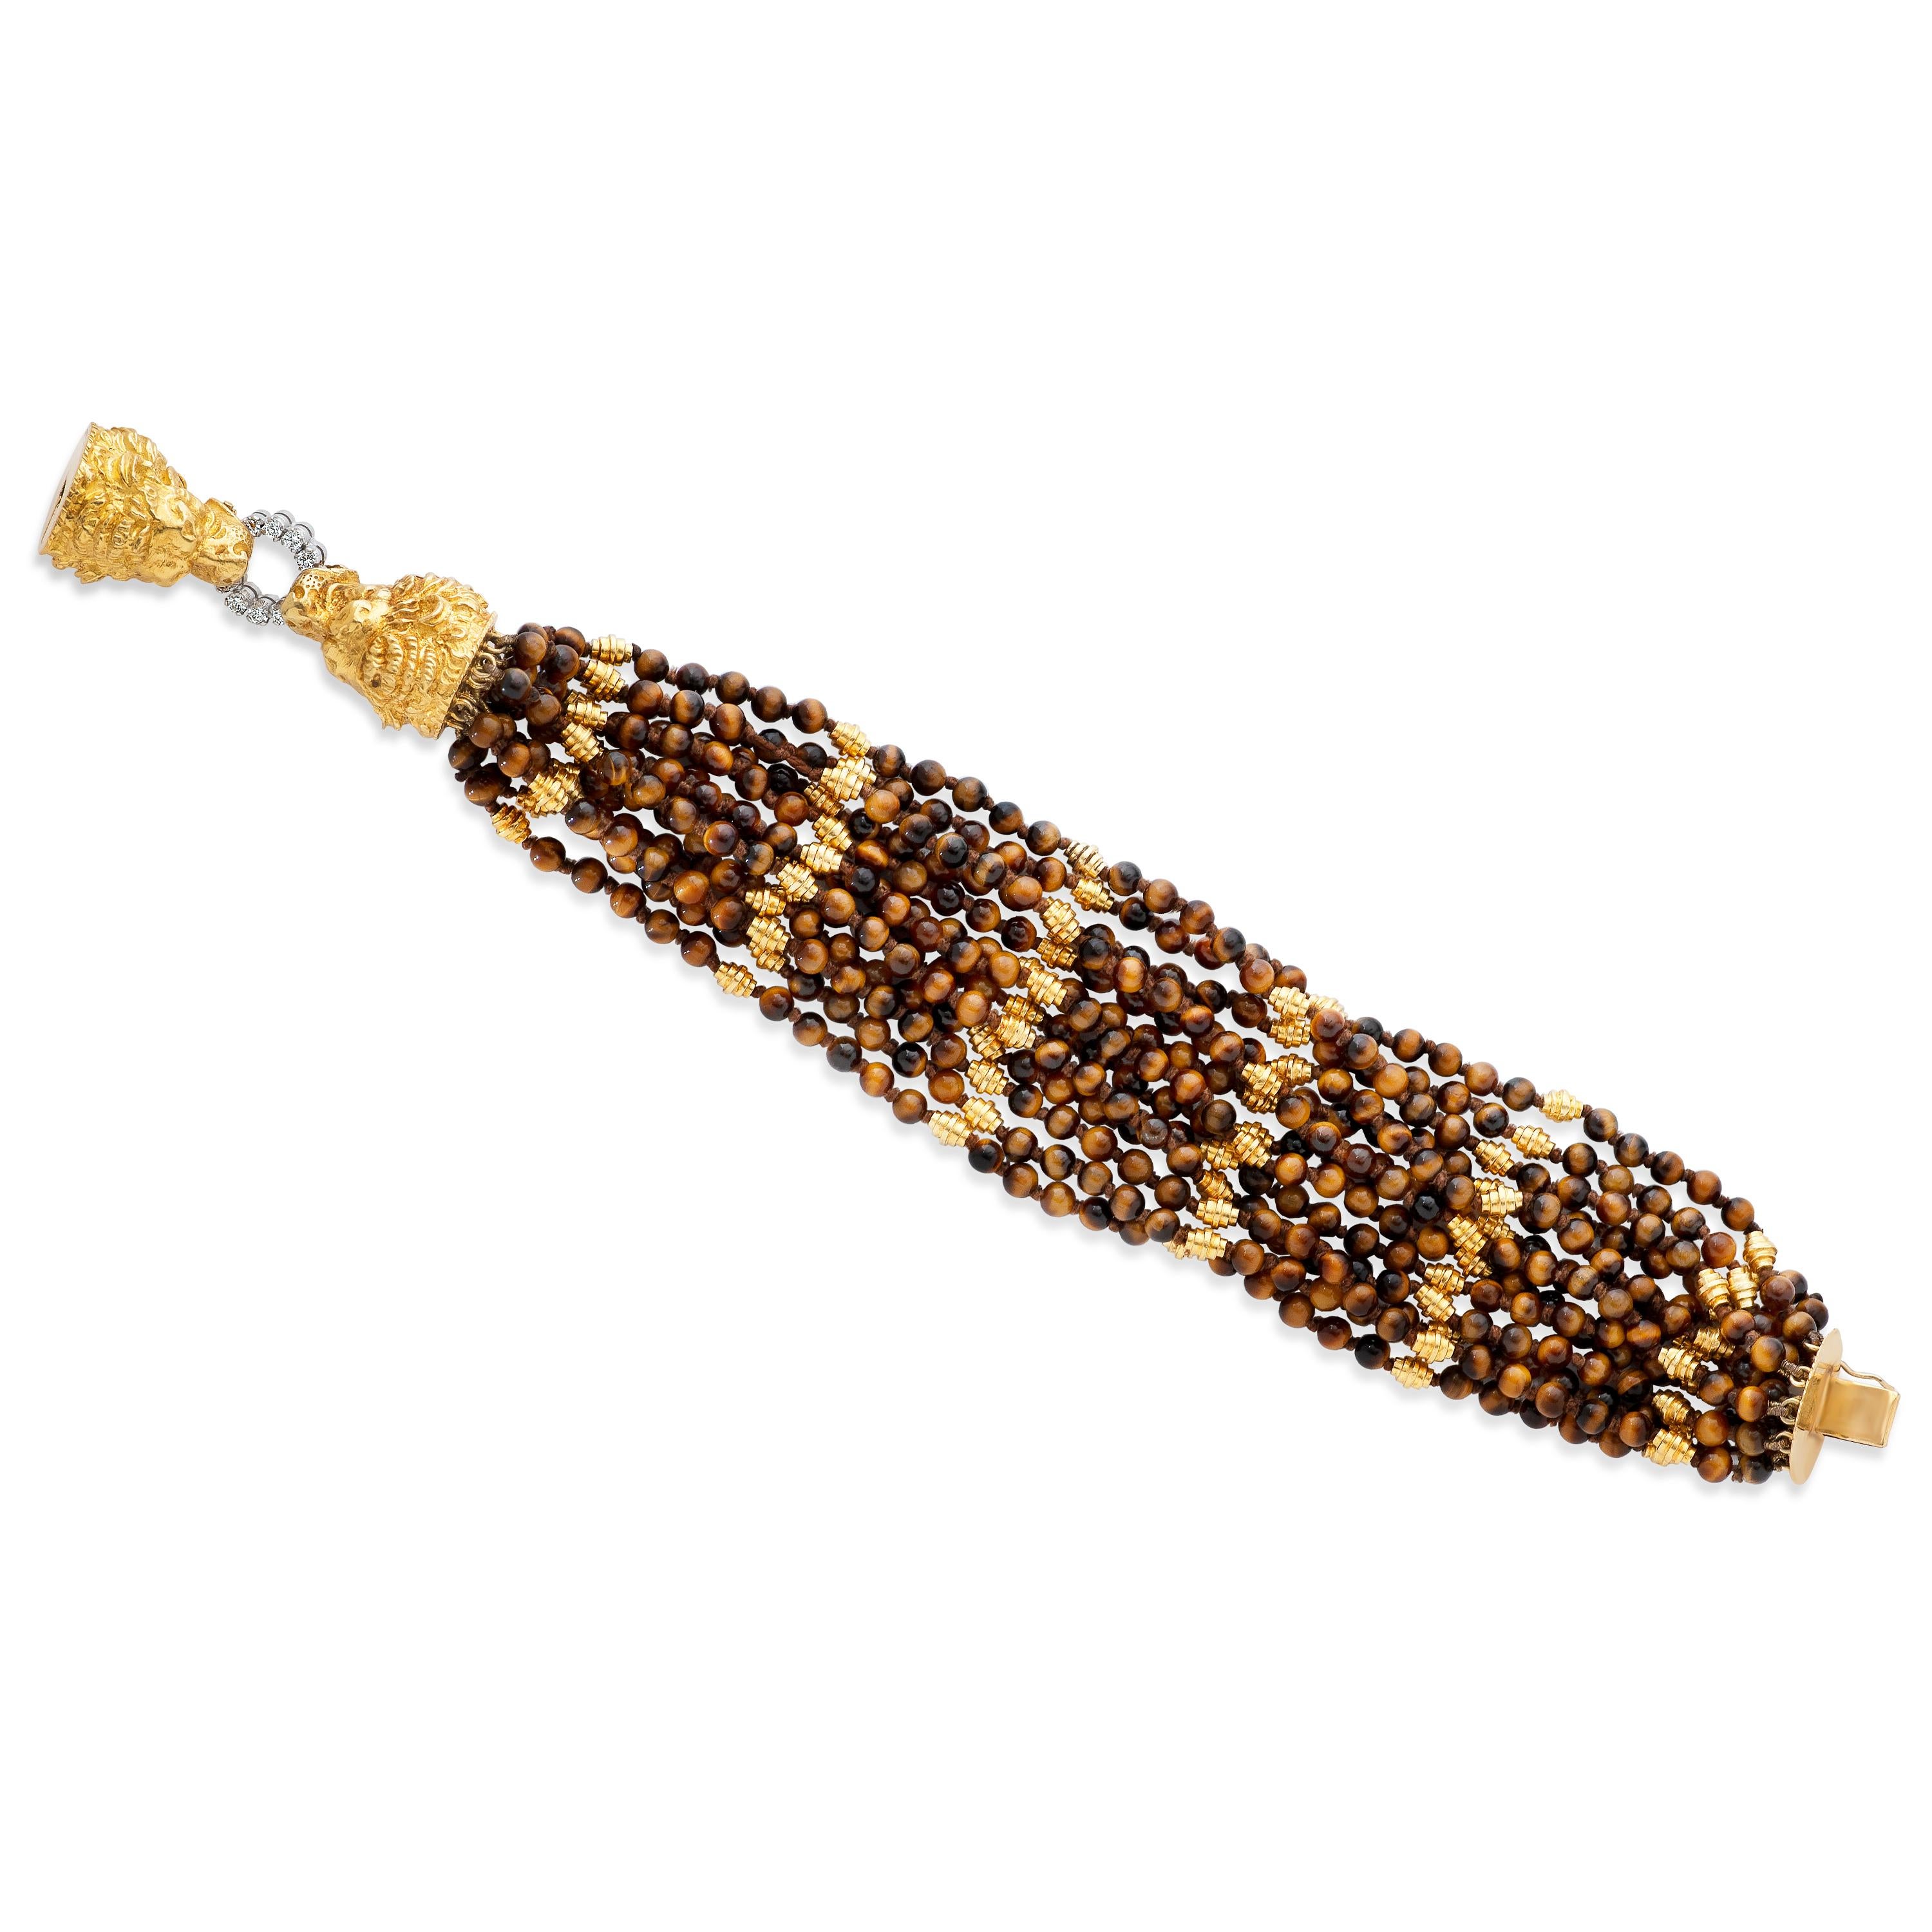 Vintage Graff multi-strand tiger's eye bead bracelet with 18k yellow & 18k white gold diamond accented double lion head clasp.

This unique bracelet features 13 strands of 4mm tiger's eye beads with 18kyg accents. The strands come together at two